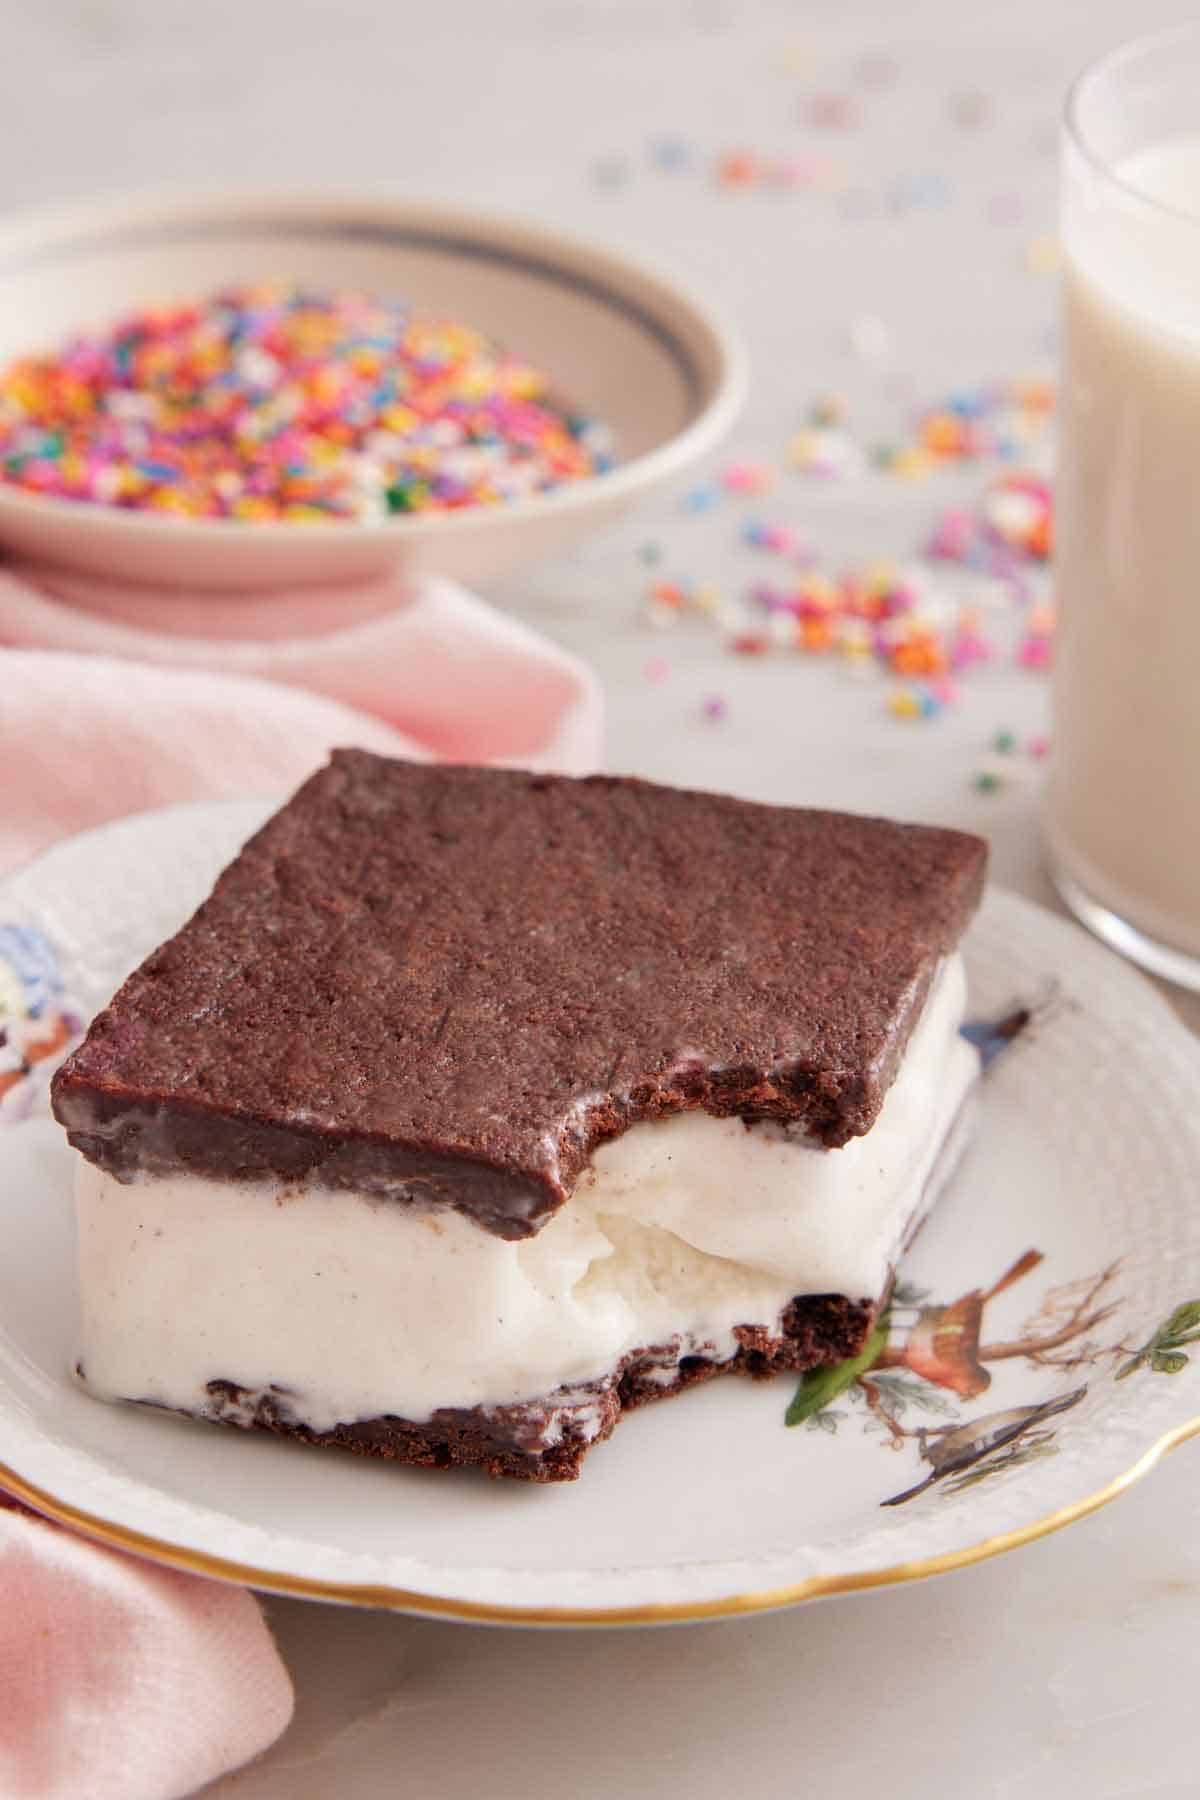 A plate with a ice cream sandwich with a bite taken out of the corner with a bowl of sprinkles in the background.